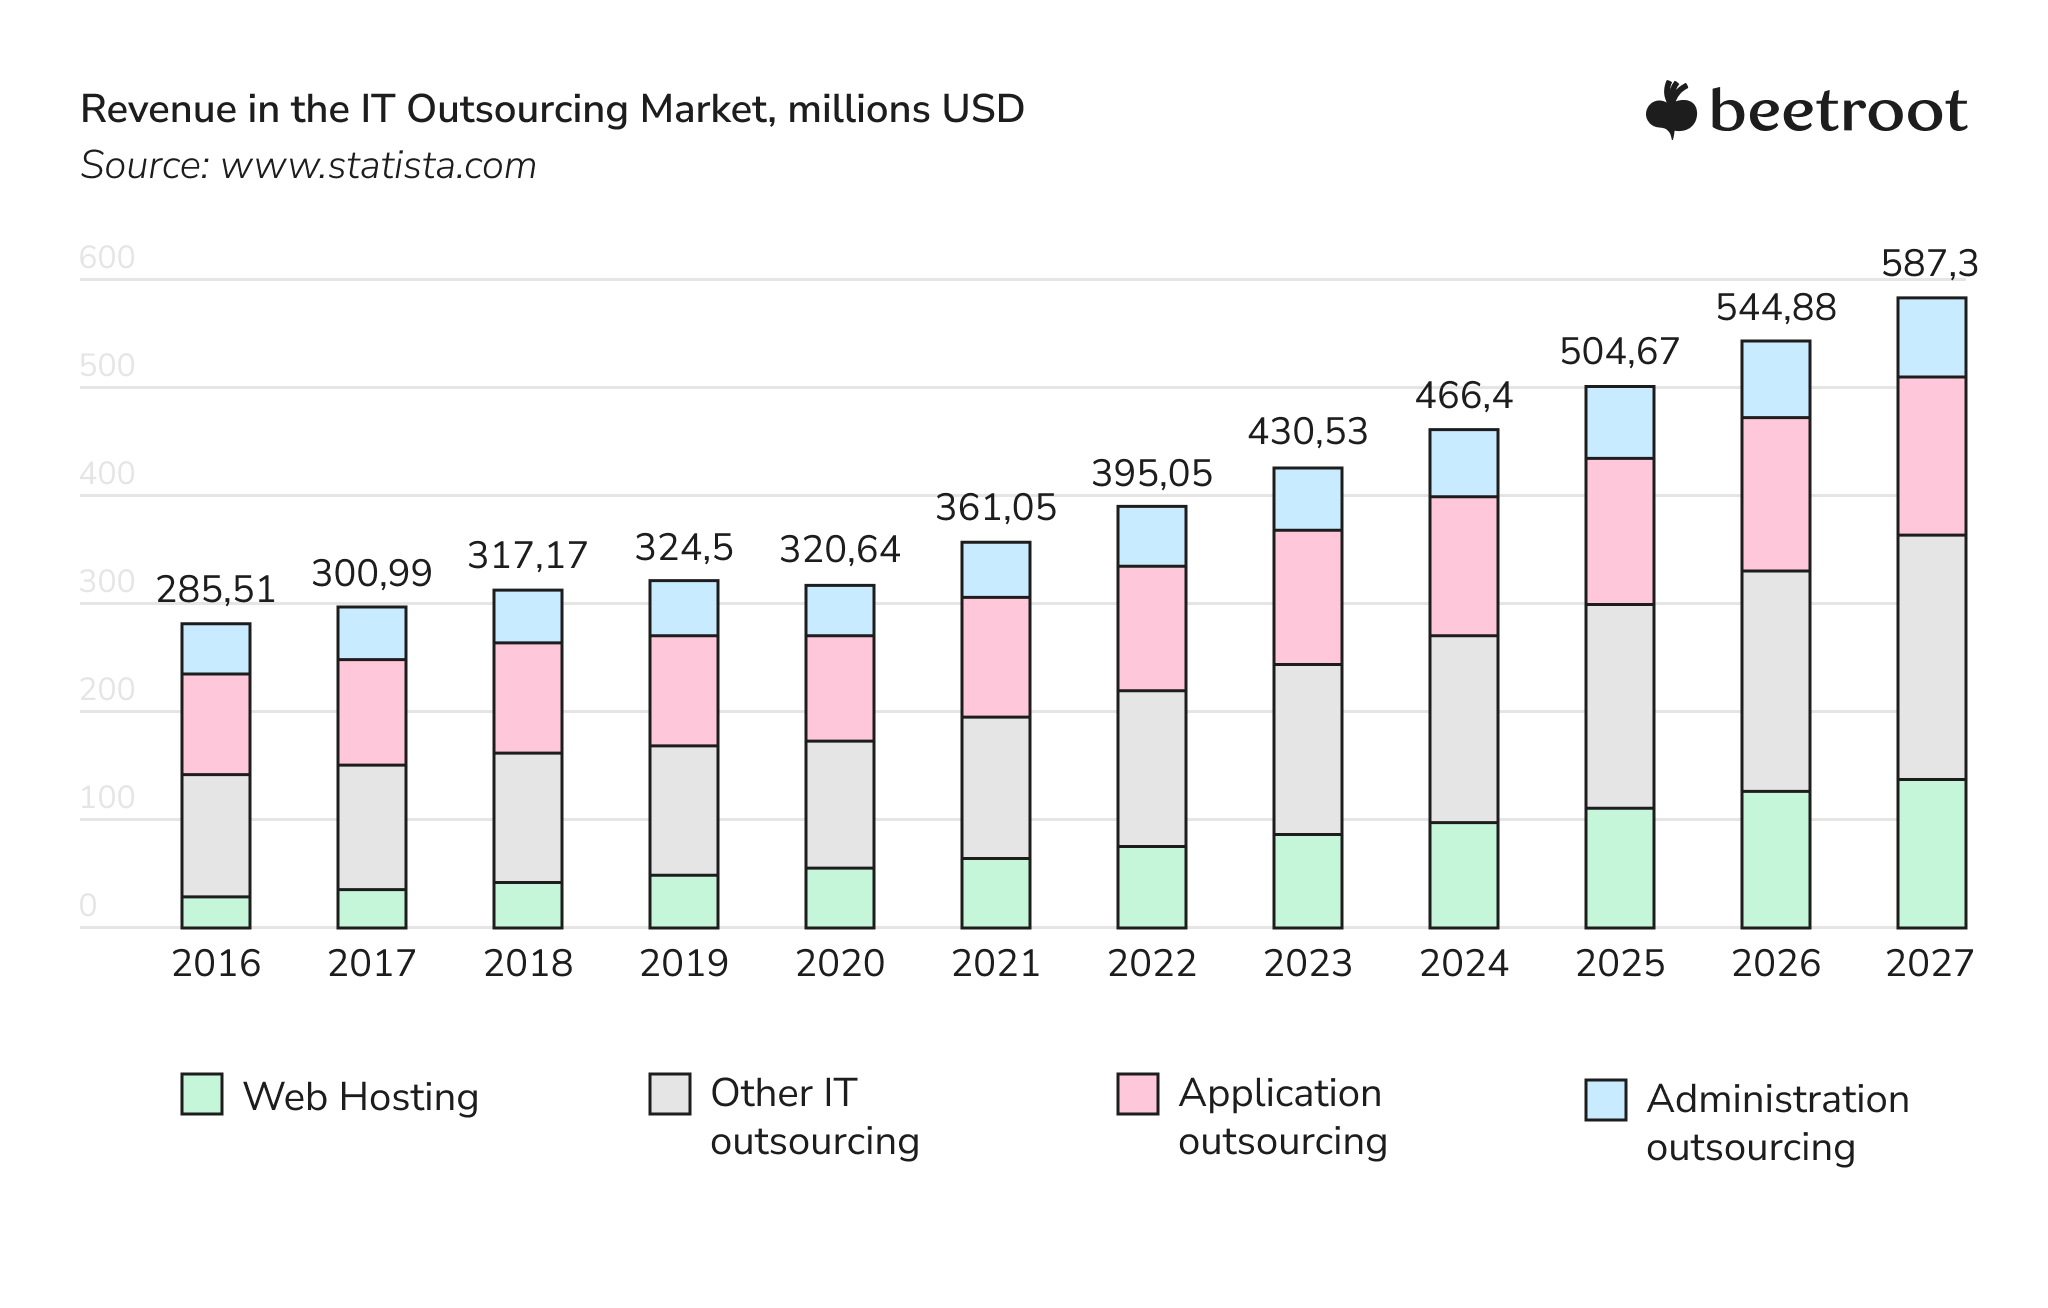 Revenue in the IT outsourcing market 